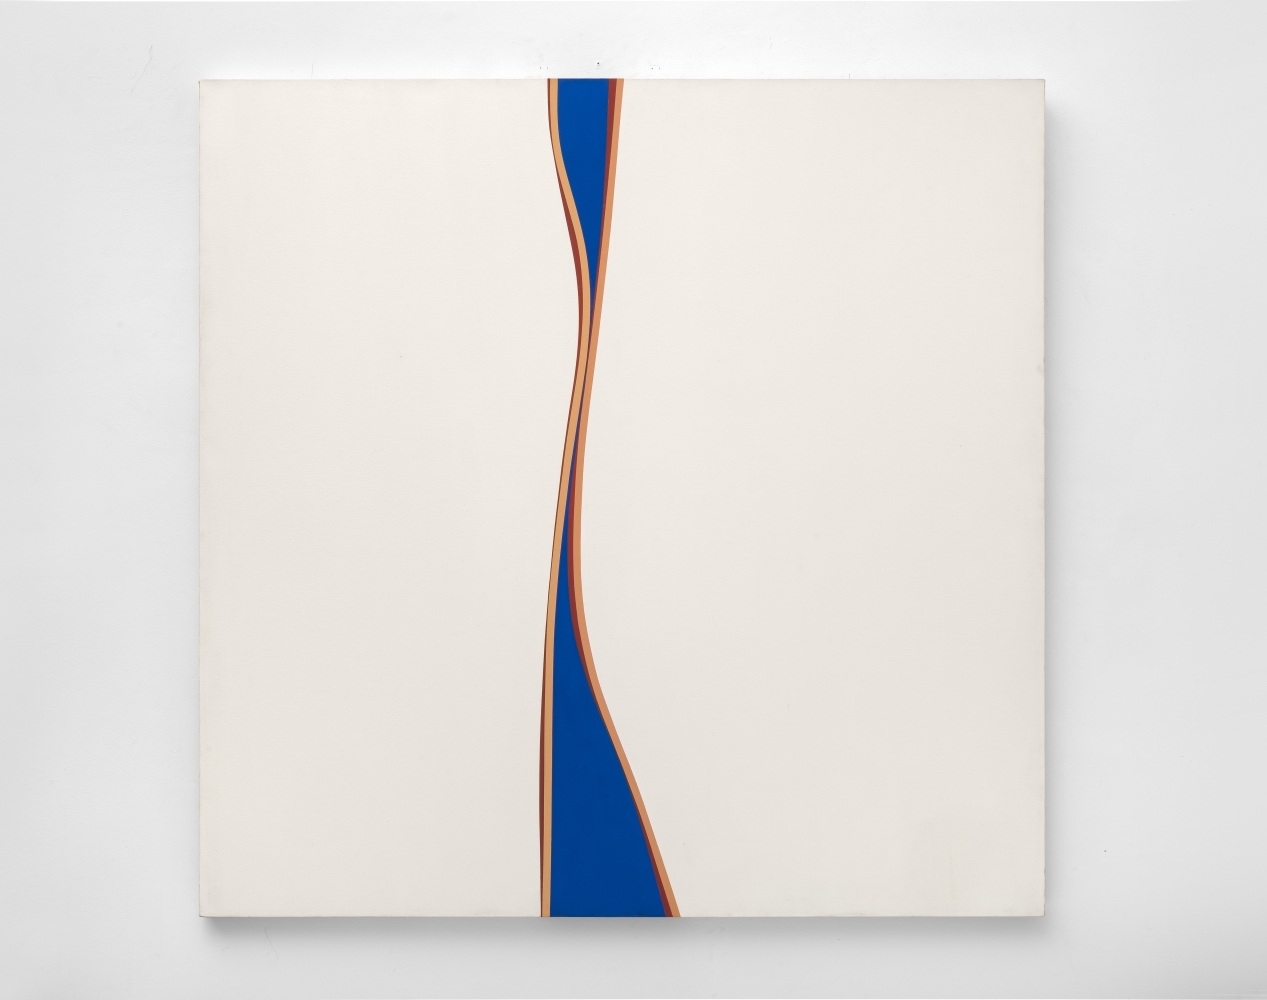 Lorser Feitelson (1898-1978) Untitled (January 30), 1971 acrylic on canvas 60 x 60 inches; 152.4 x 152.4 centimeters LSFA# 01350